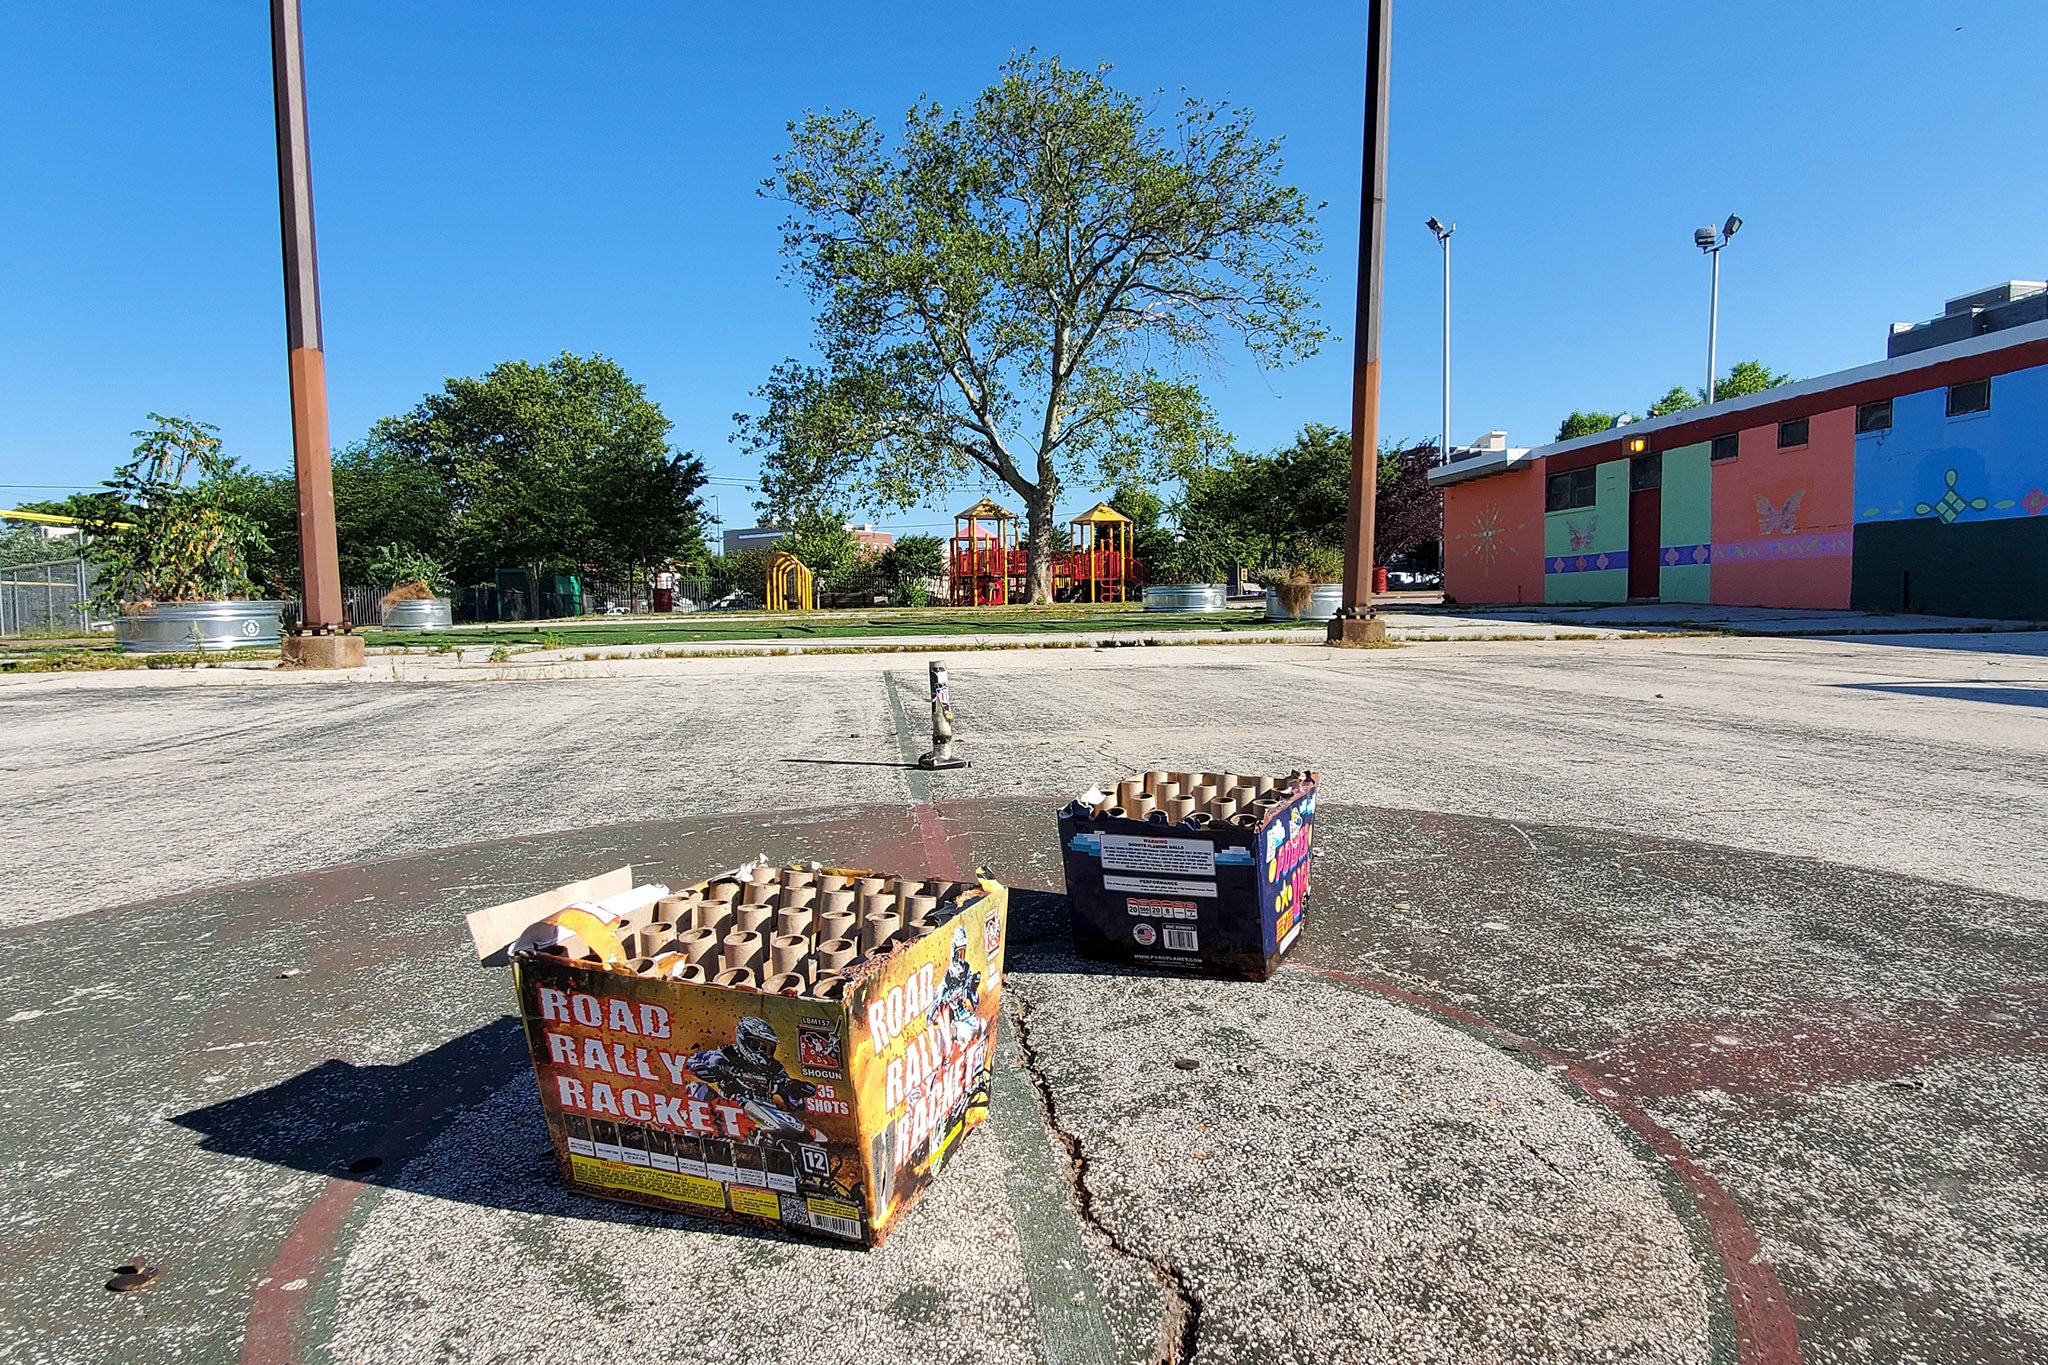 Fireworks in Francisville Playground, likely not used legally